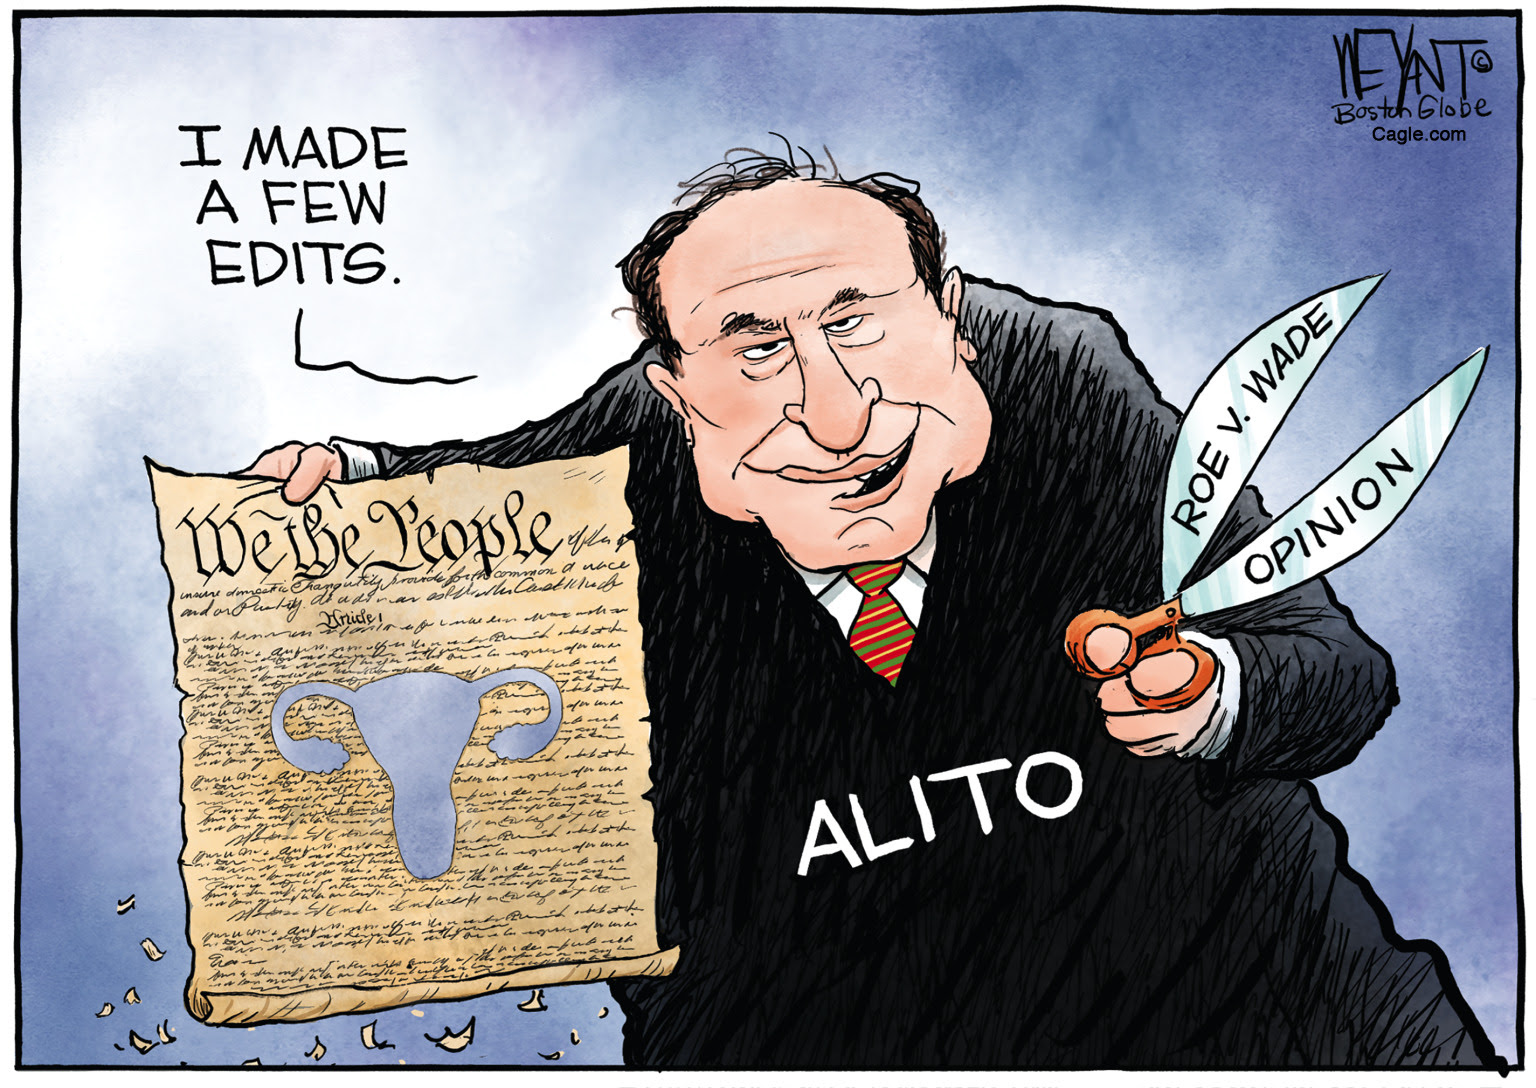 Alito moves to overturn Roe v Wade denying women their right to abortions and control over their own bodies